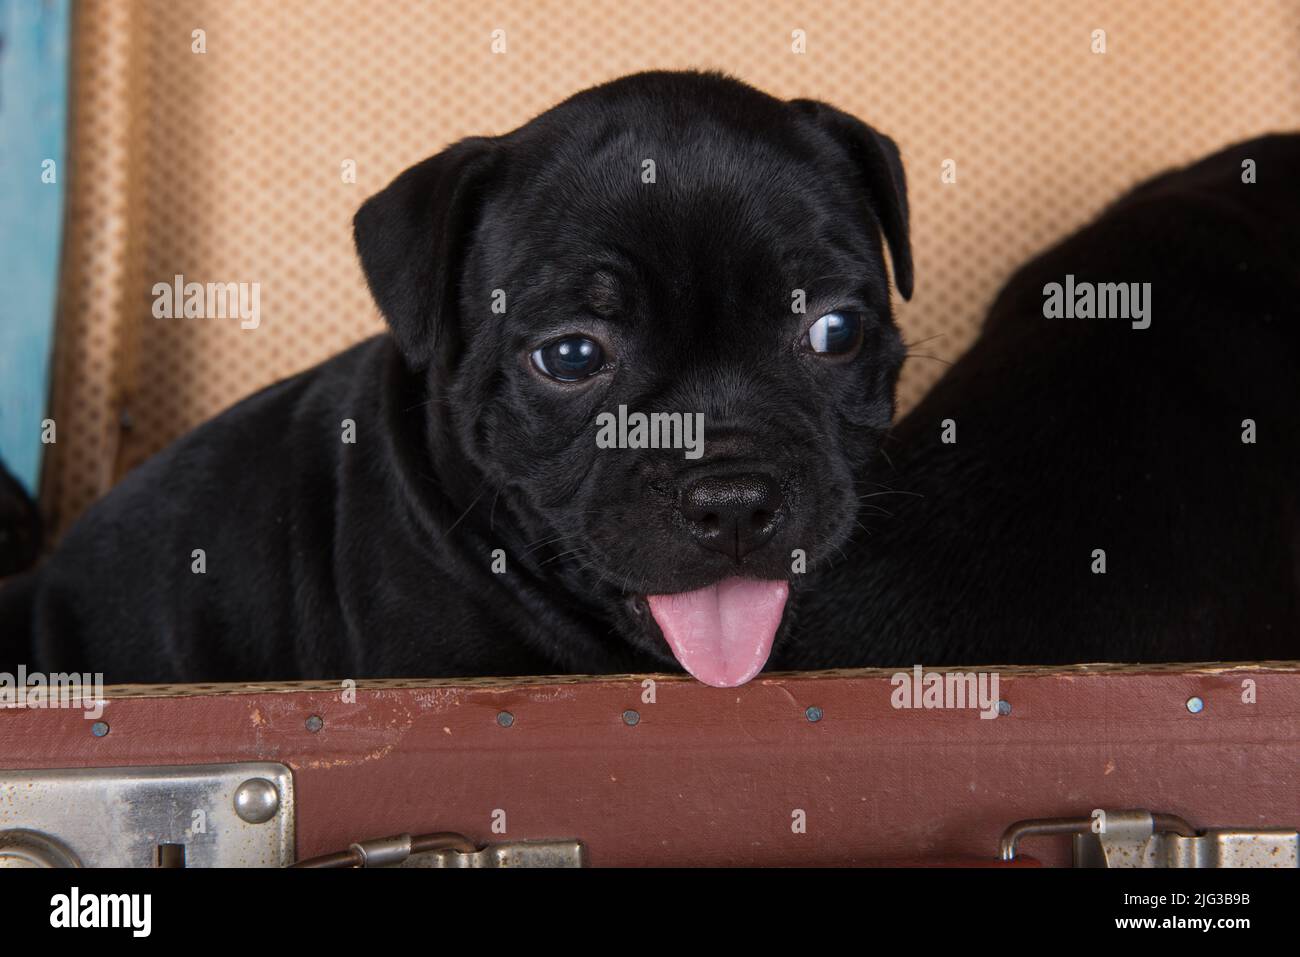 Black American Staffordshire Terrier dog or AmStaff puppy in a retro suitcase Stock Photo